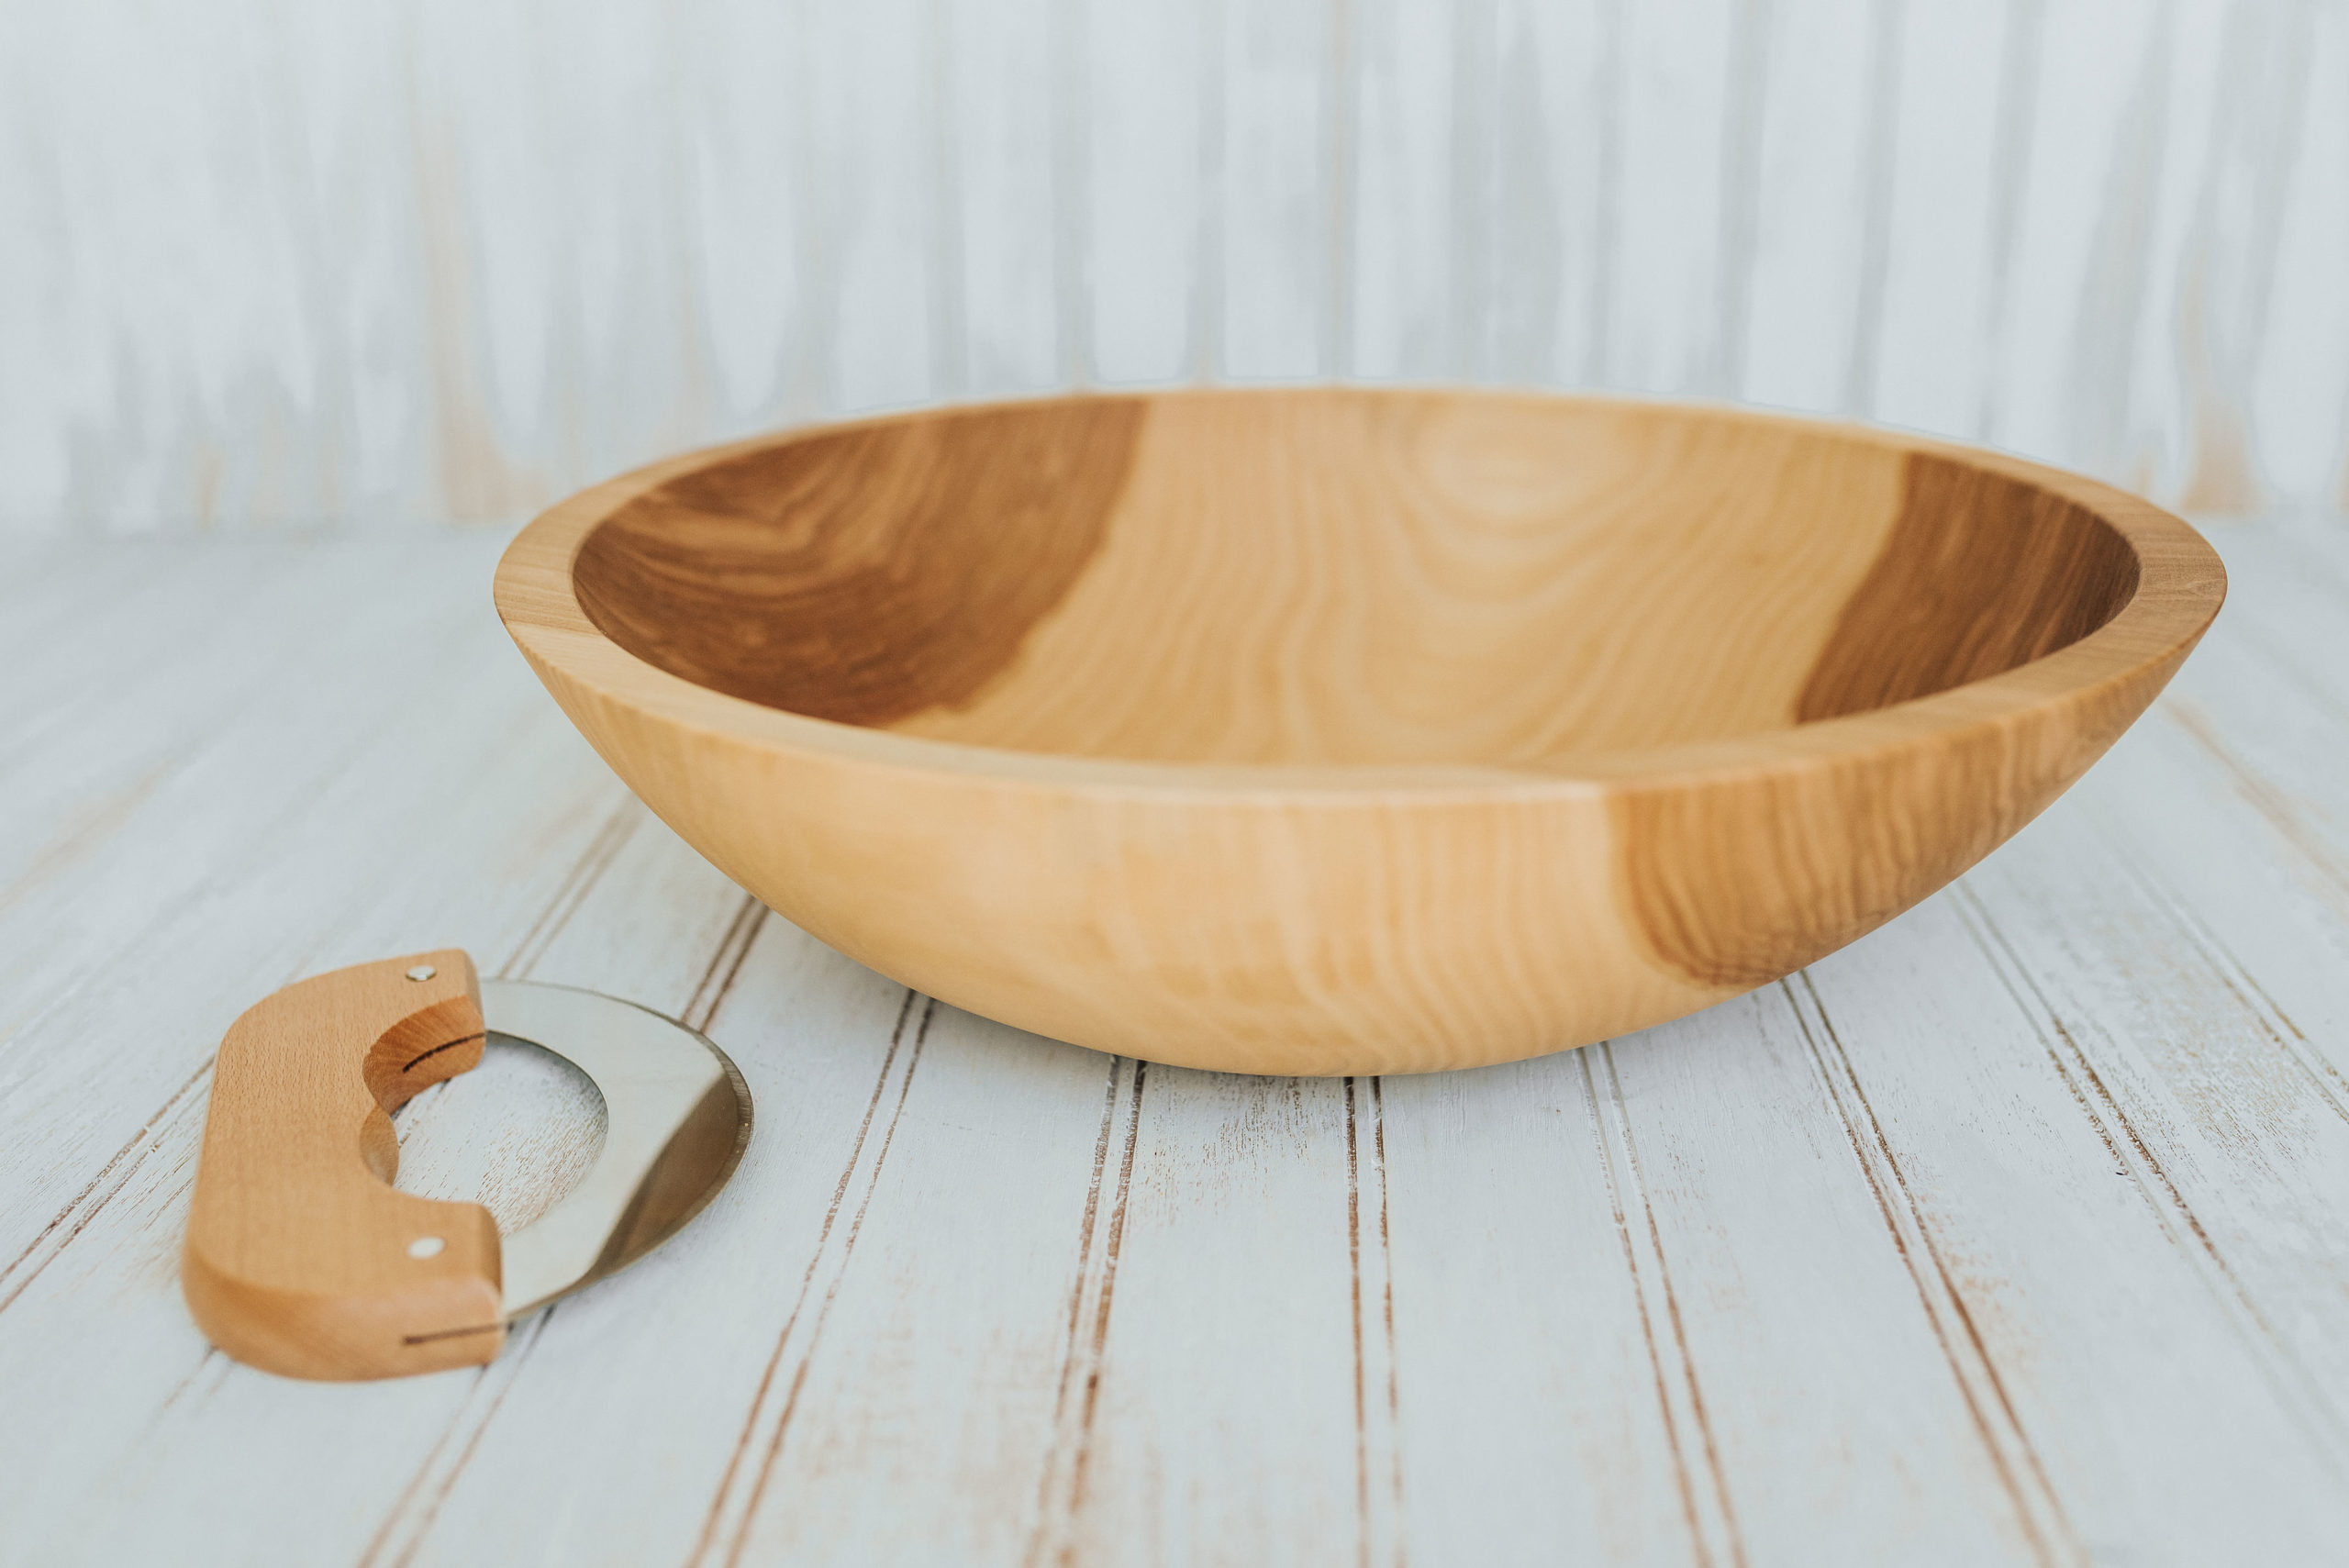 Worried about ruining a bowl by chopping salad? We have bowls made  specifically for chopping and come with a custom Mezzaluna knife. Explore  our, By Holland Bowl Mill